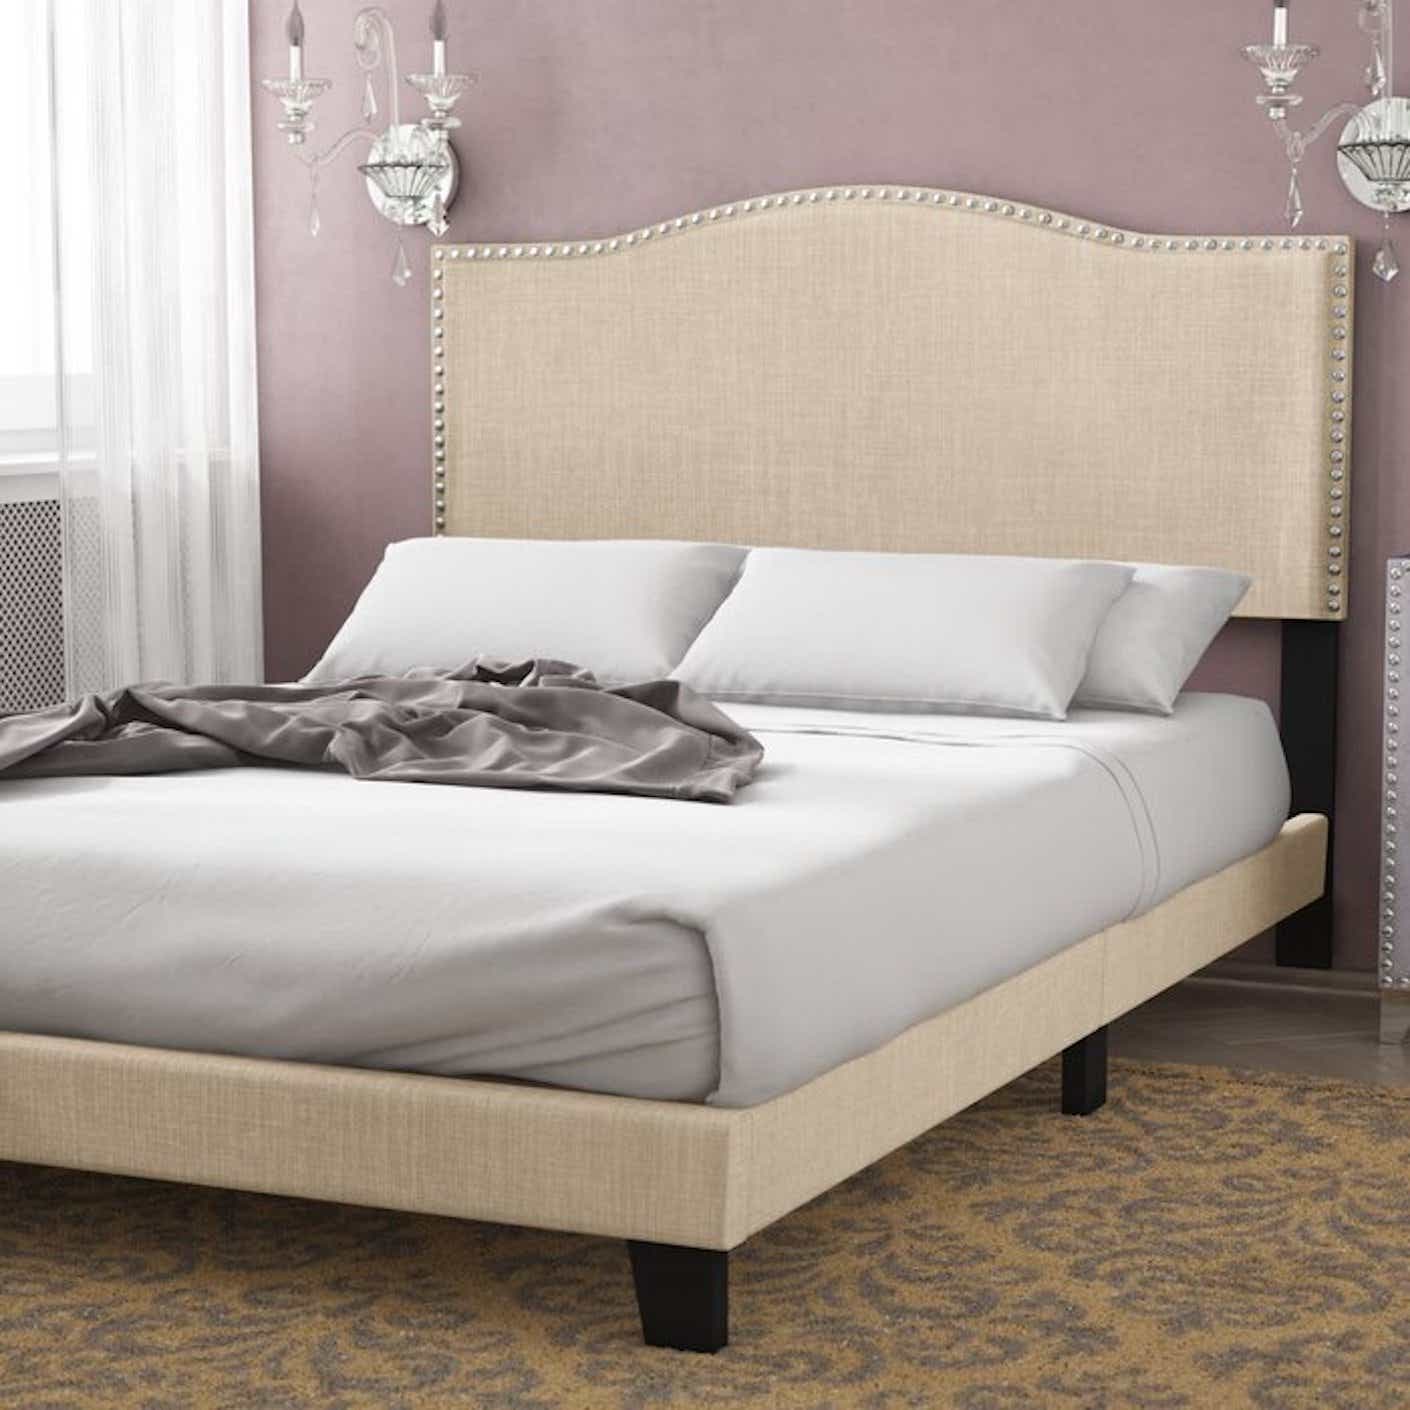 A cream-colored, upholstered bed pictured in a bedroom.